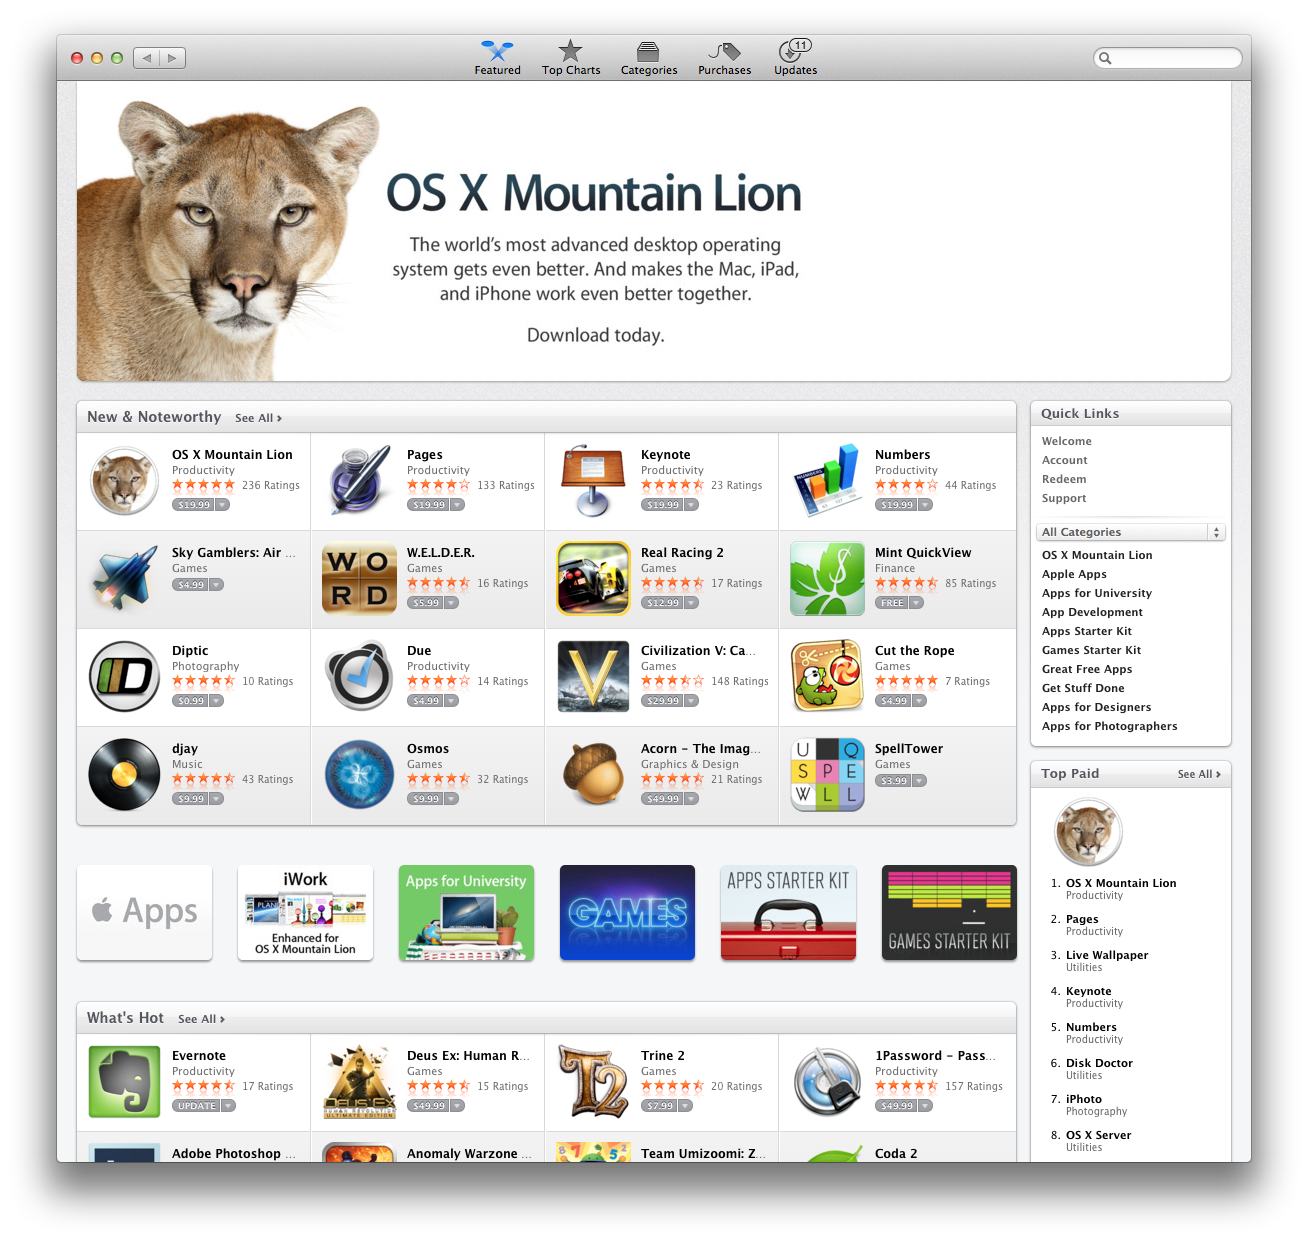 Where Can I Download Mac Os X Lion